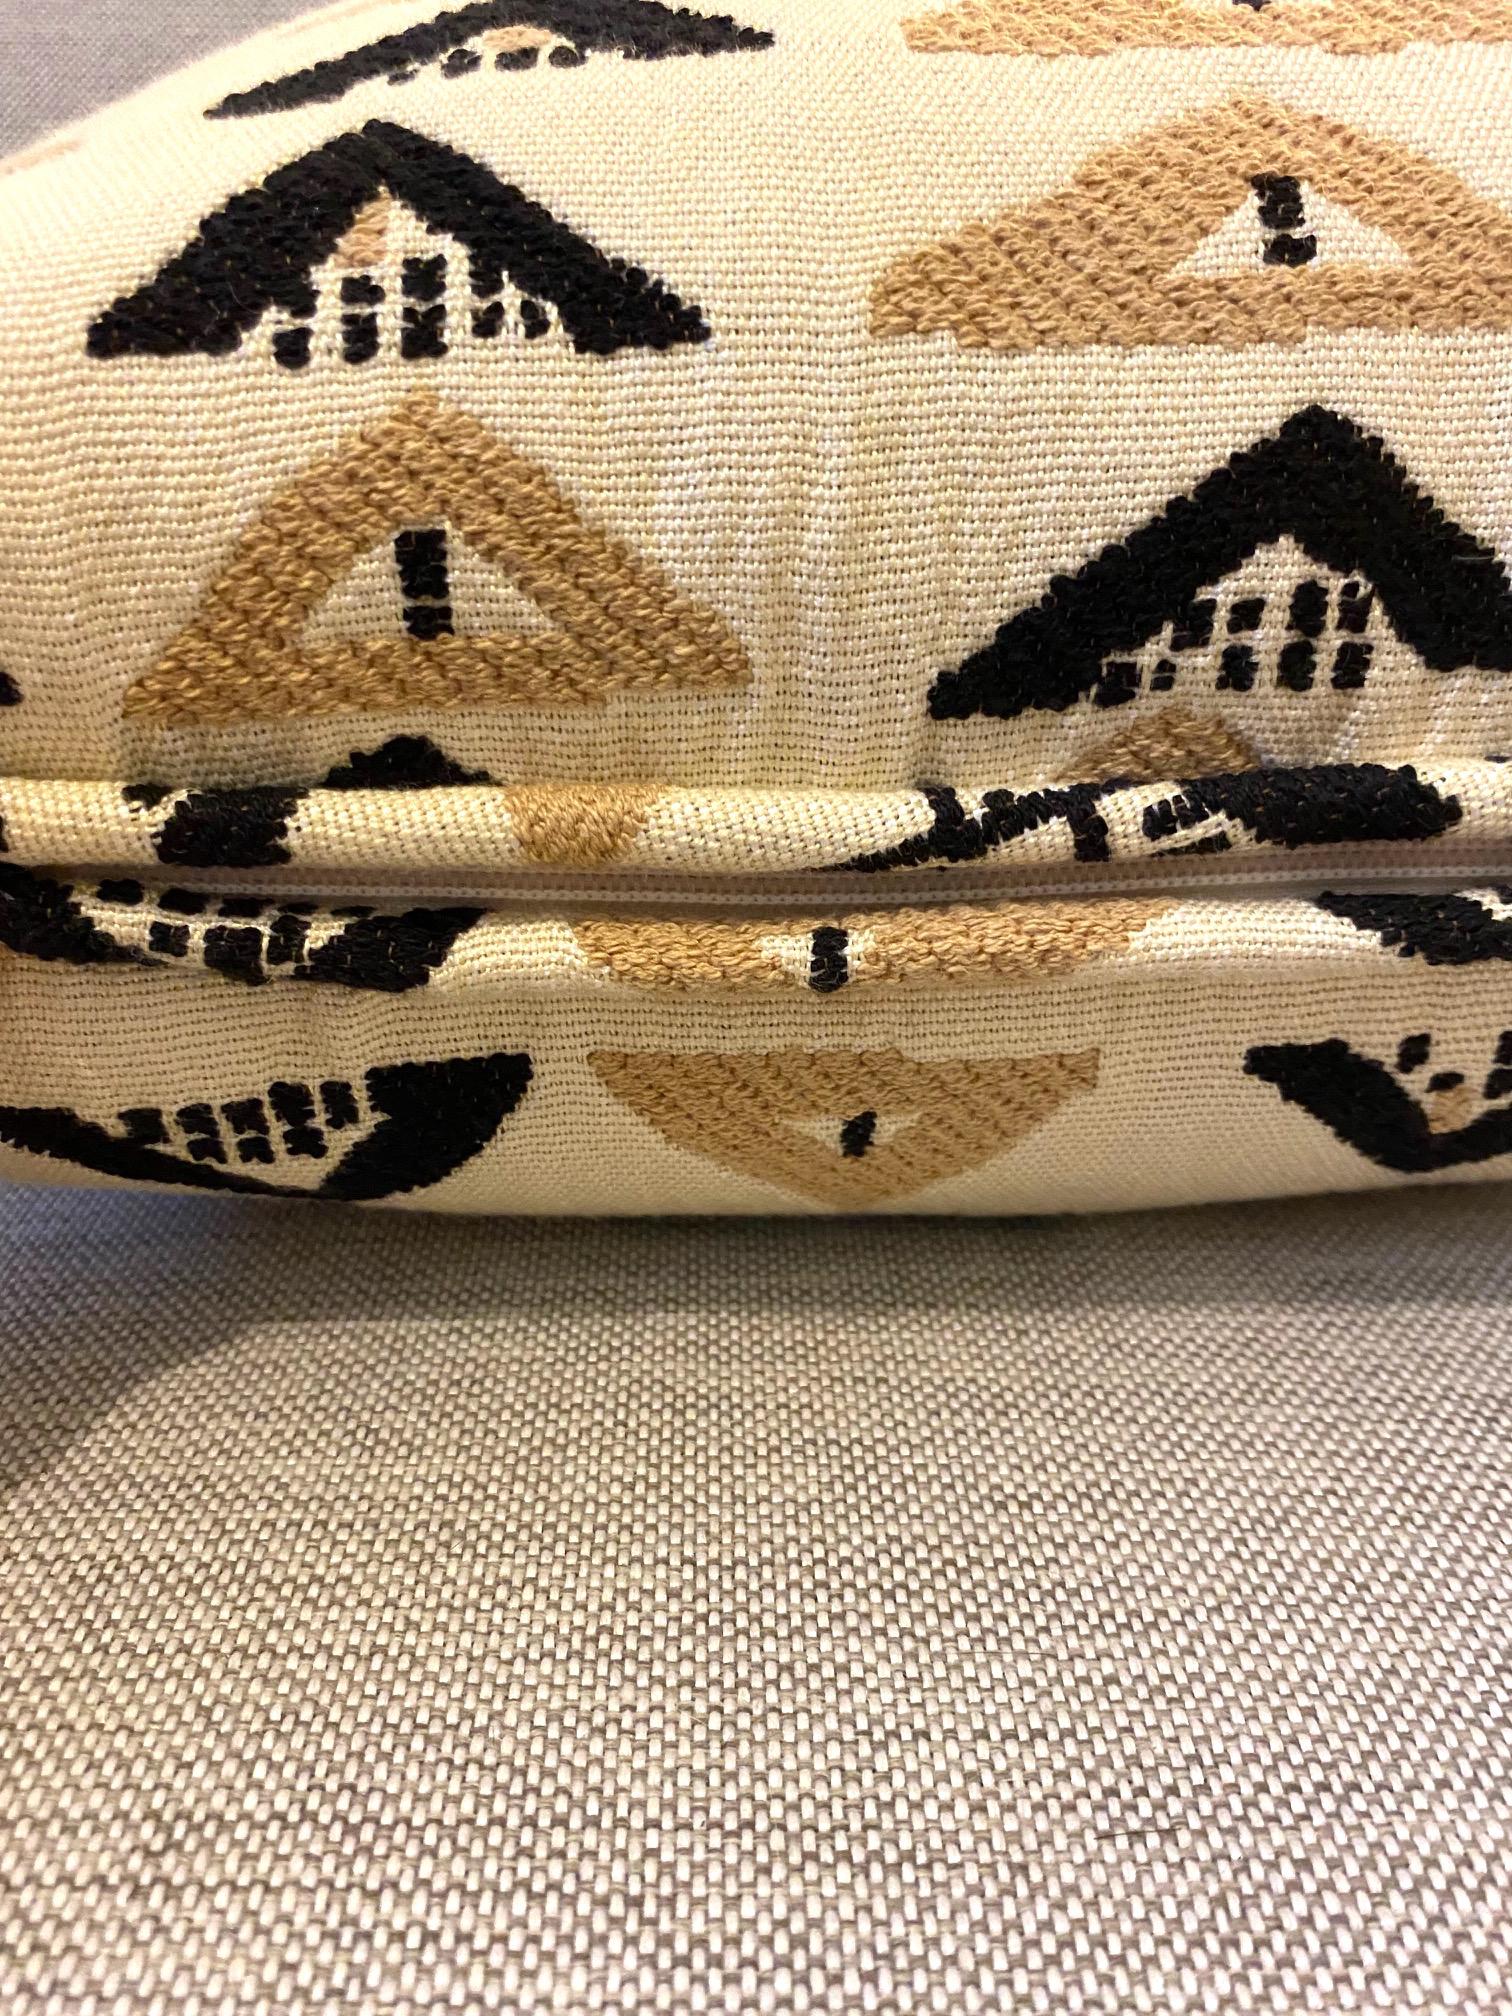 Contemporary Pierre Frey Throw Pillow with Vintage African Kuba Print in Beige and Black